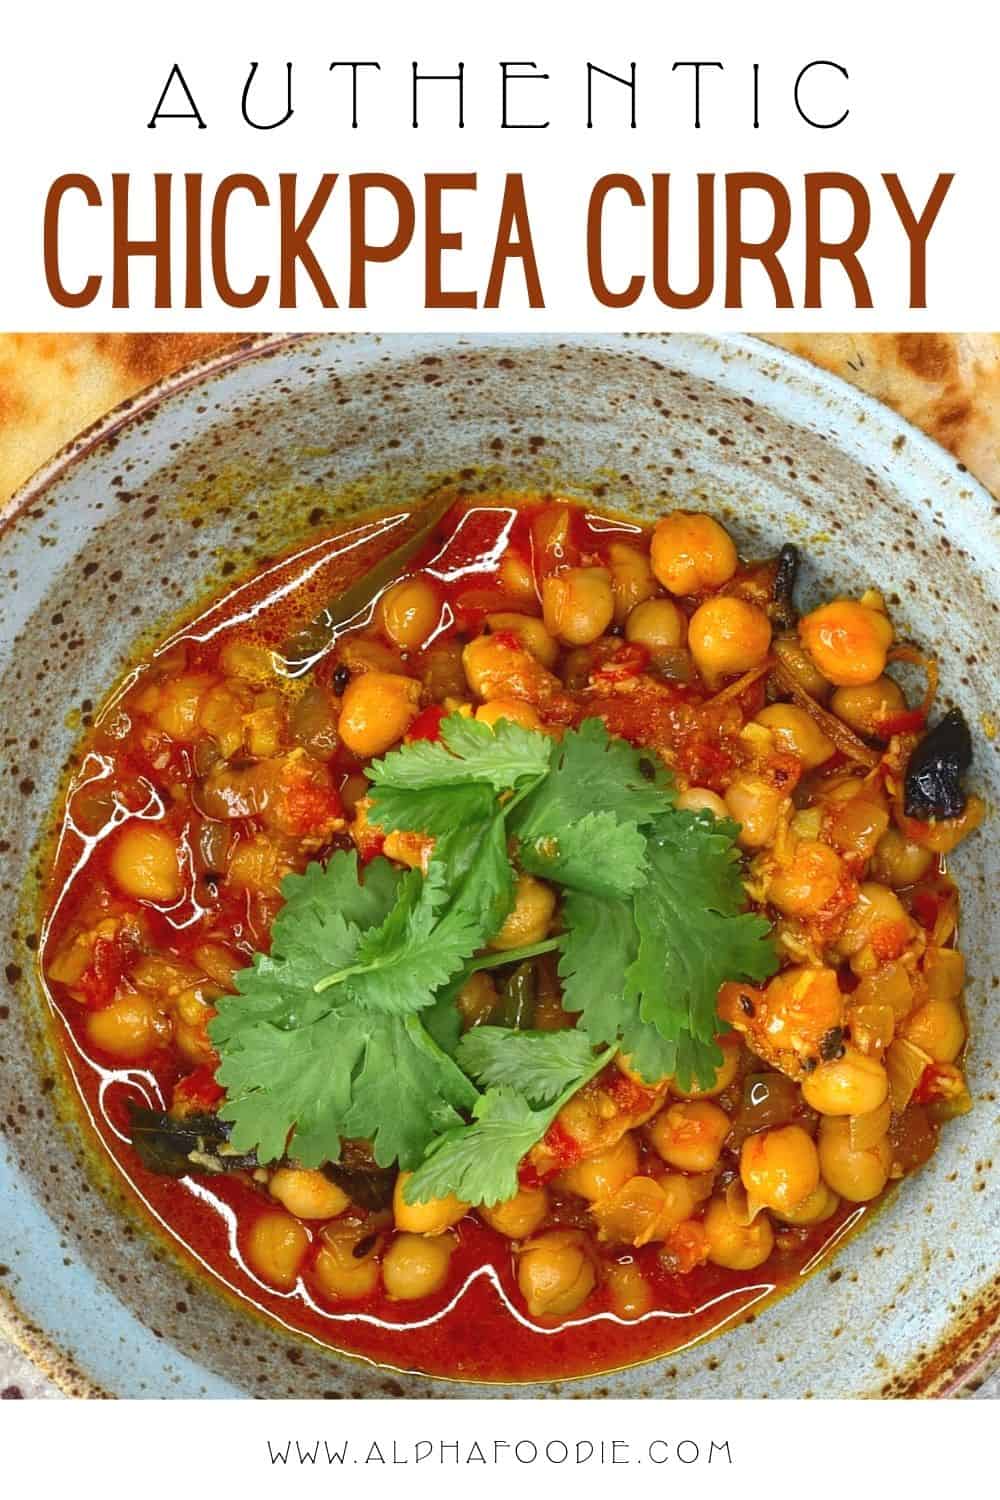 Chickpea Curry 1 